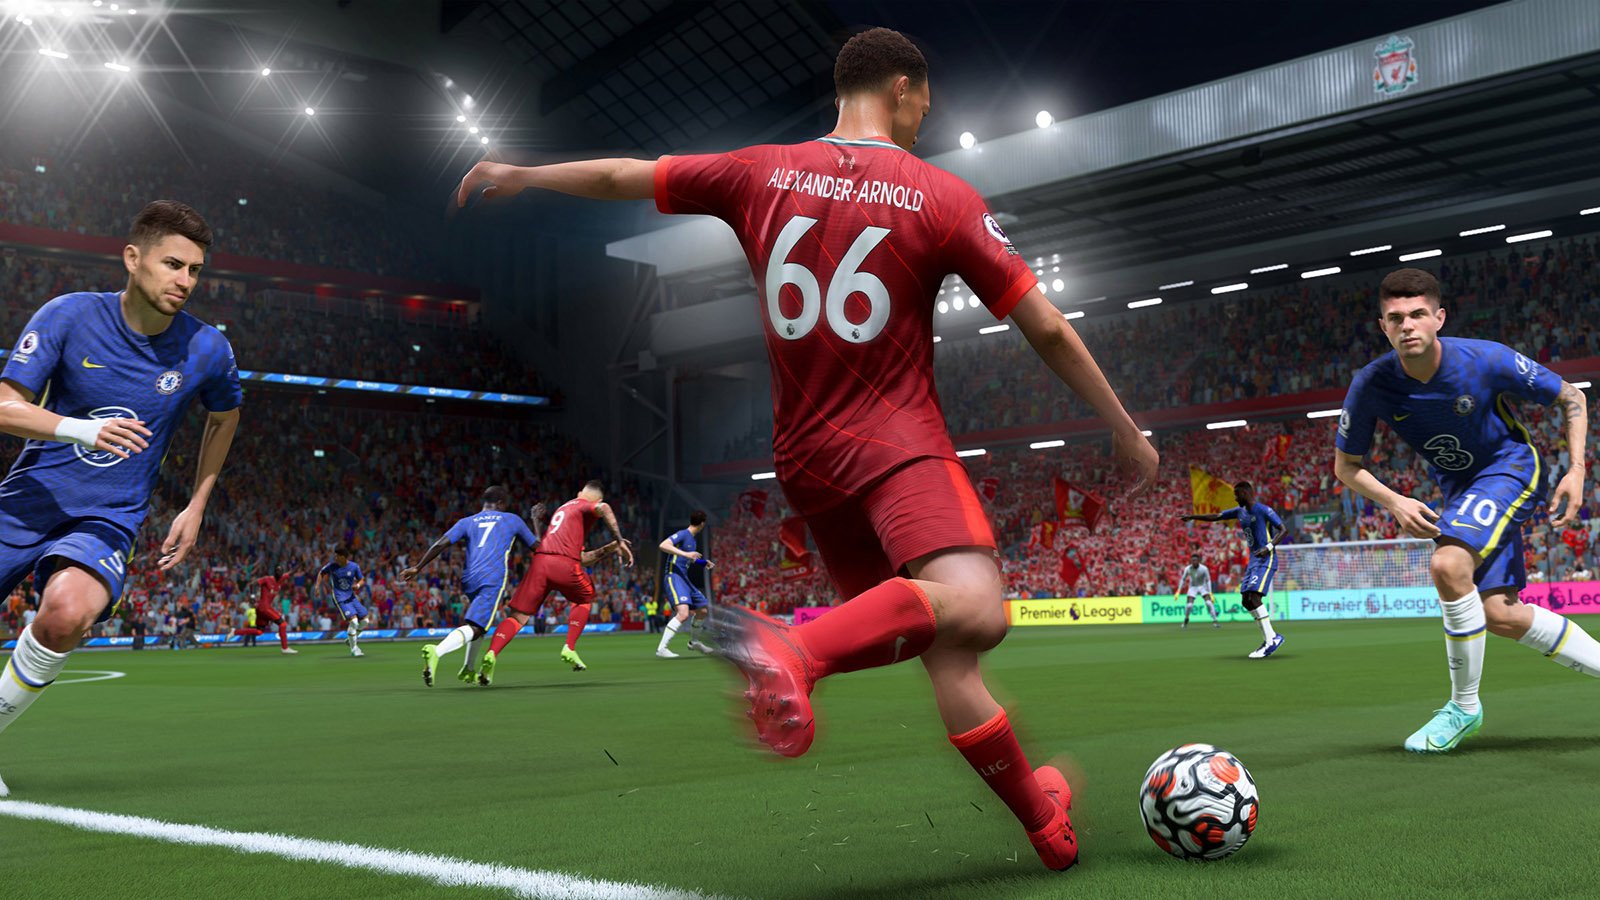 FIFA 22 Online Servers Will Be Down For Maintenance Today (October 14th)